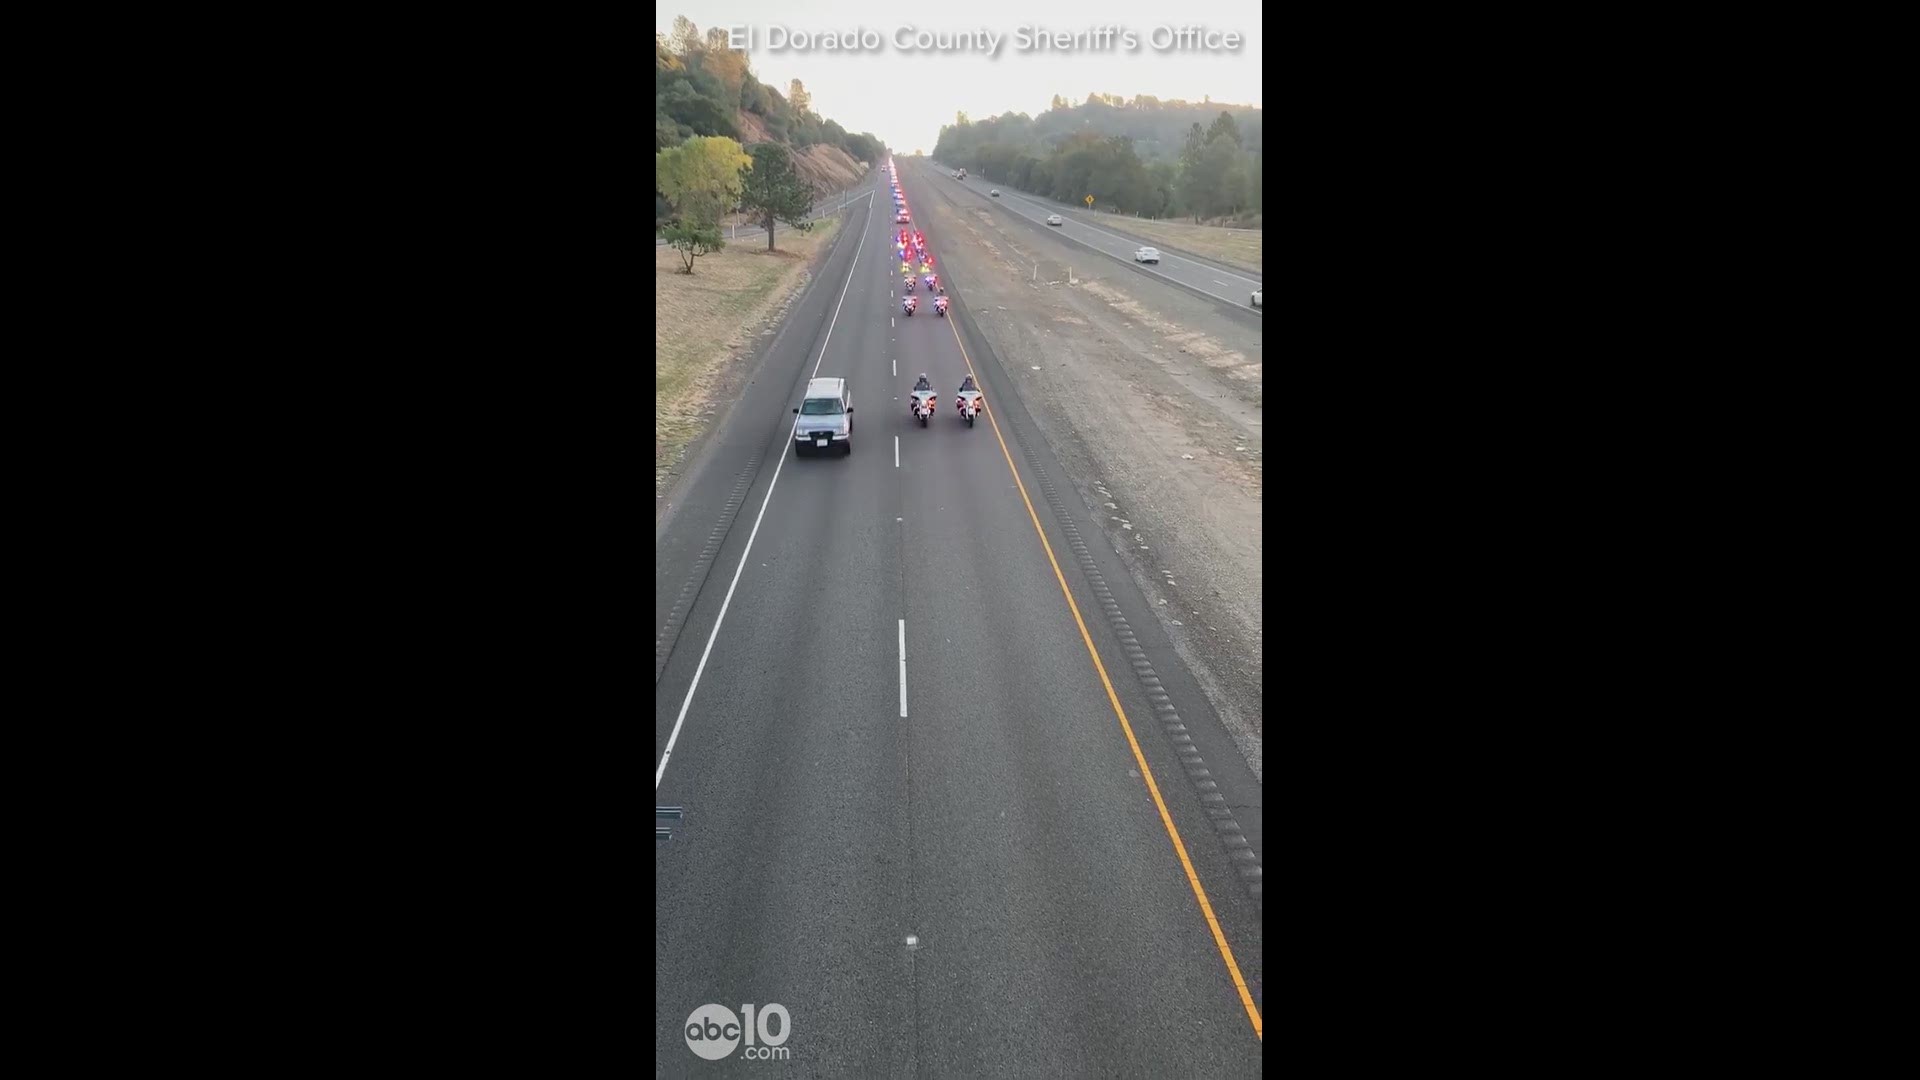 The El Dorado County Sheriff's Office shared a video of the procession for Deputy Brian Ishmael. The Deputy was shot and killed while responding to a call.